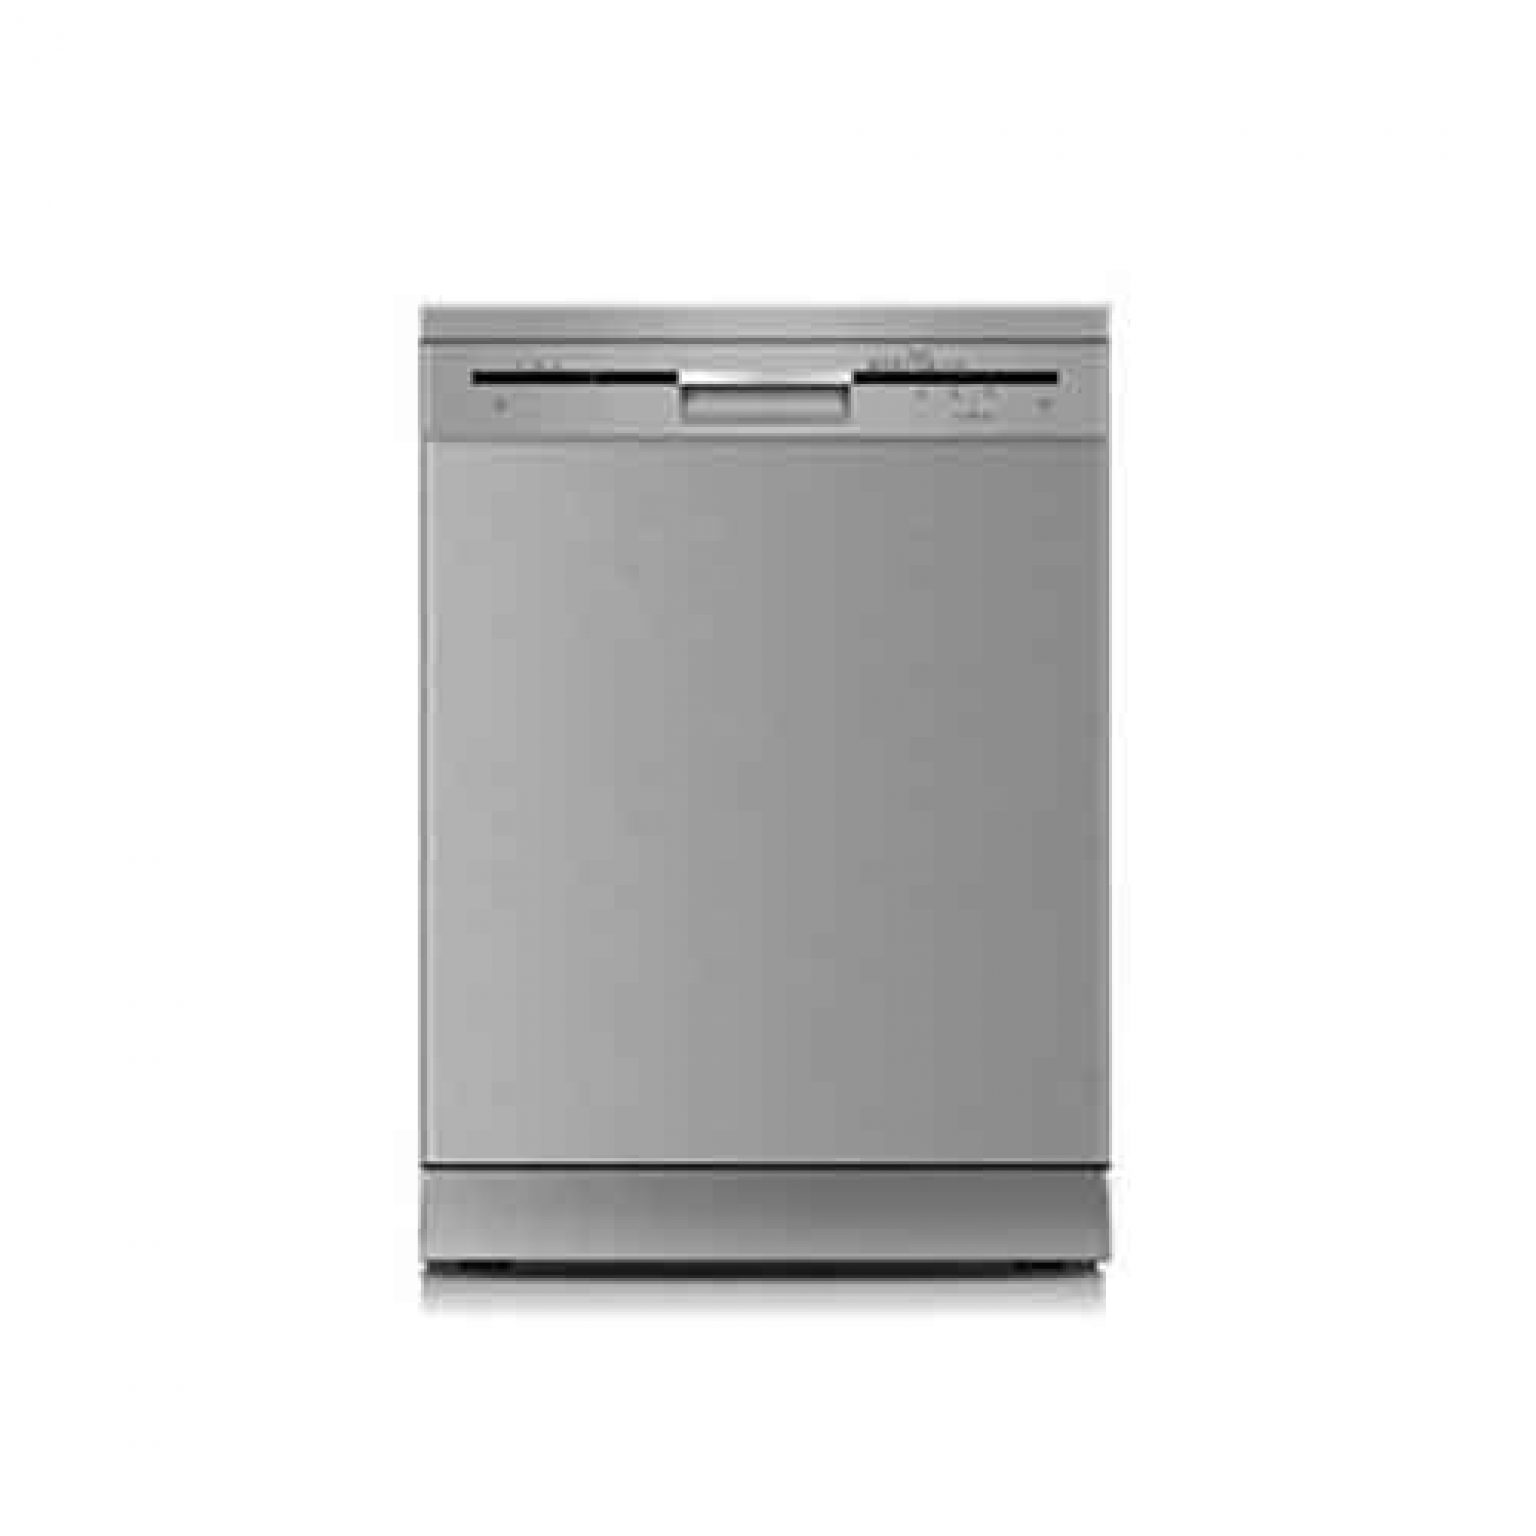 Sharp Dishwasher QW MB612-SS3 Price in Pakistan - Compare Online ...